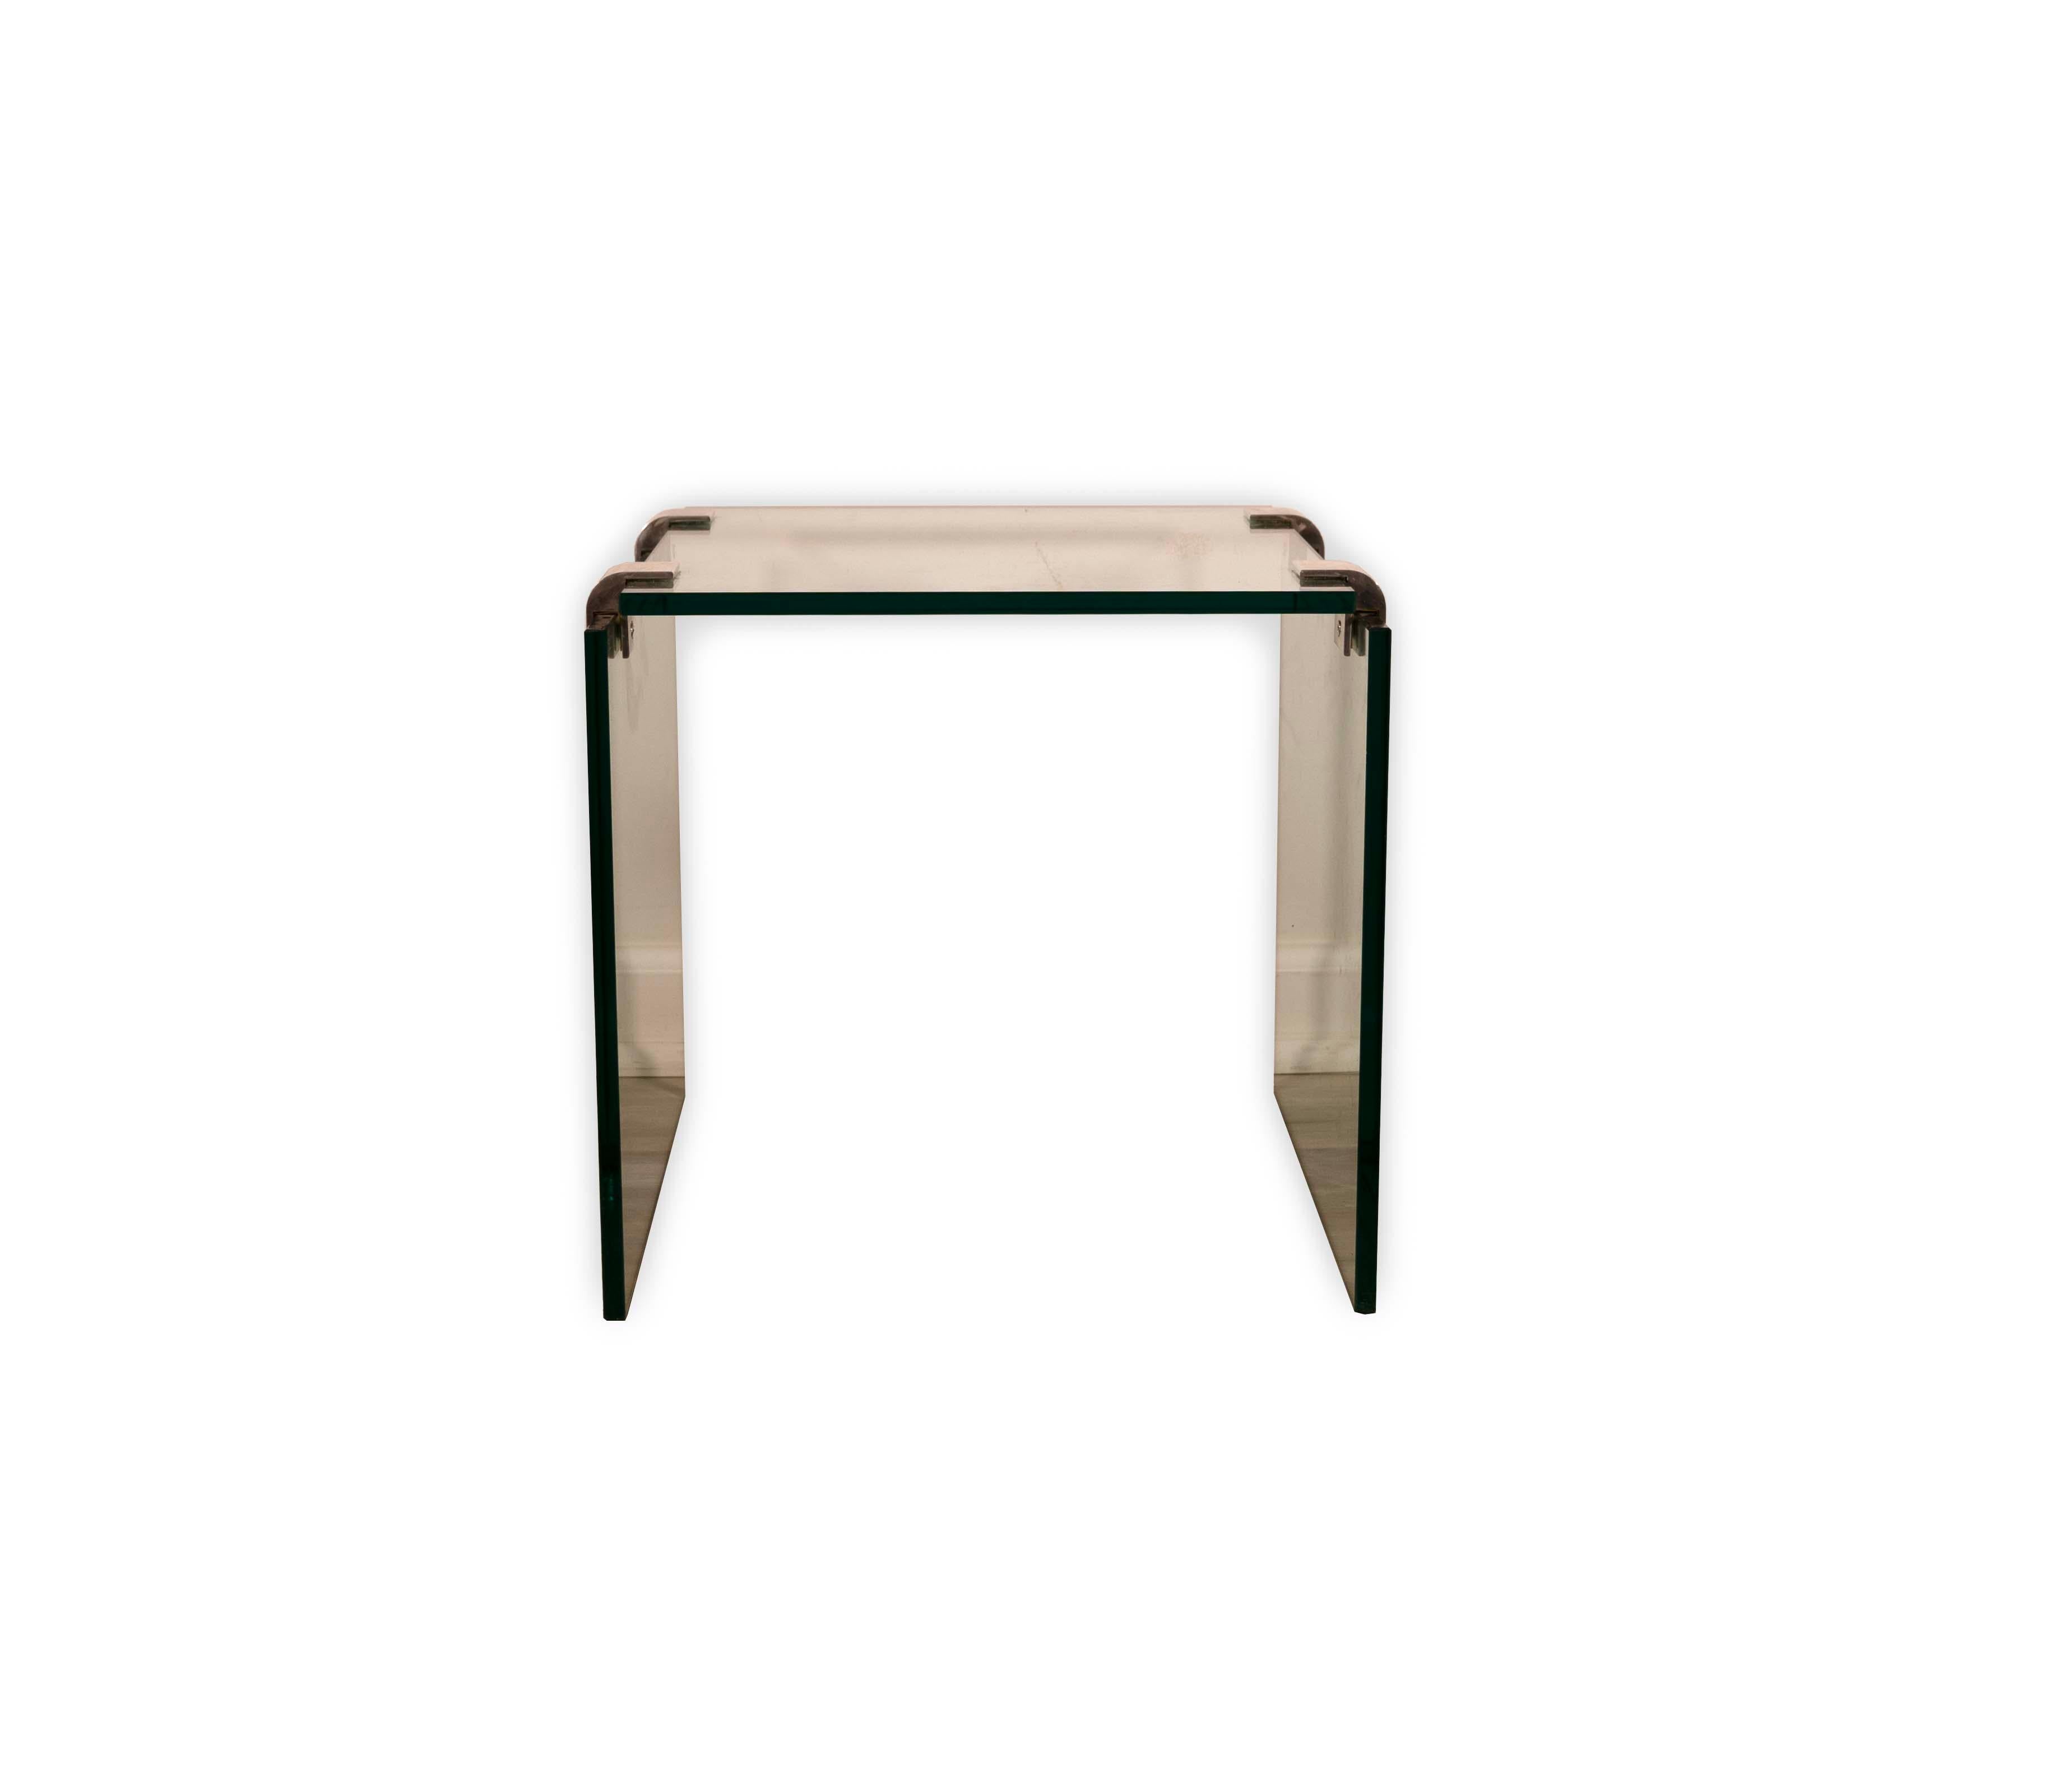 Sleek and modern, the Leon Rosen for Pace Side End Table exudes sophistication and elegance. Crafted with a seamless blend of lustrous chrome and clear, tempered glass, this end table epitomizes the minimalist chic of the mid-20th century design.